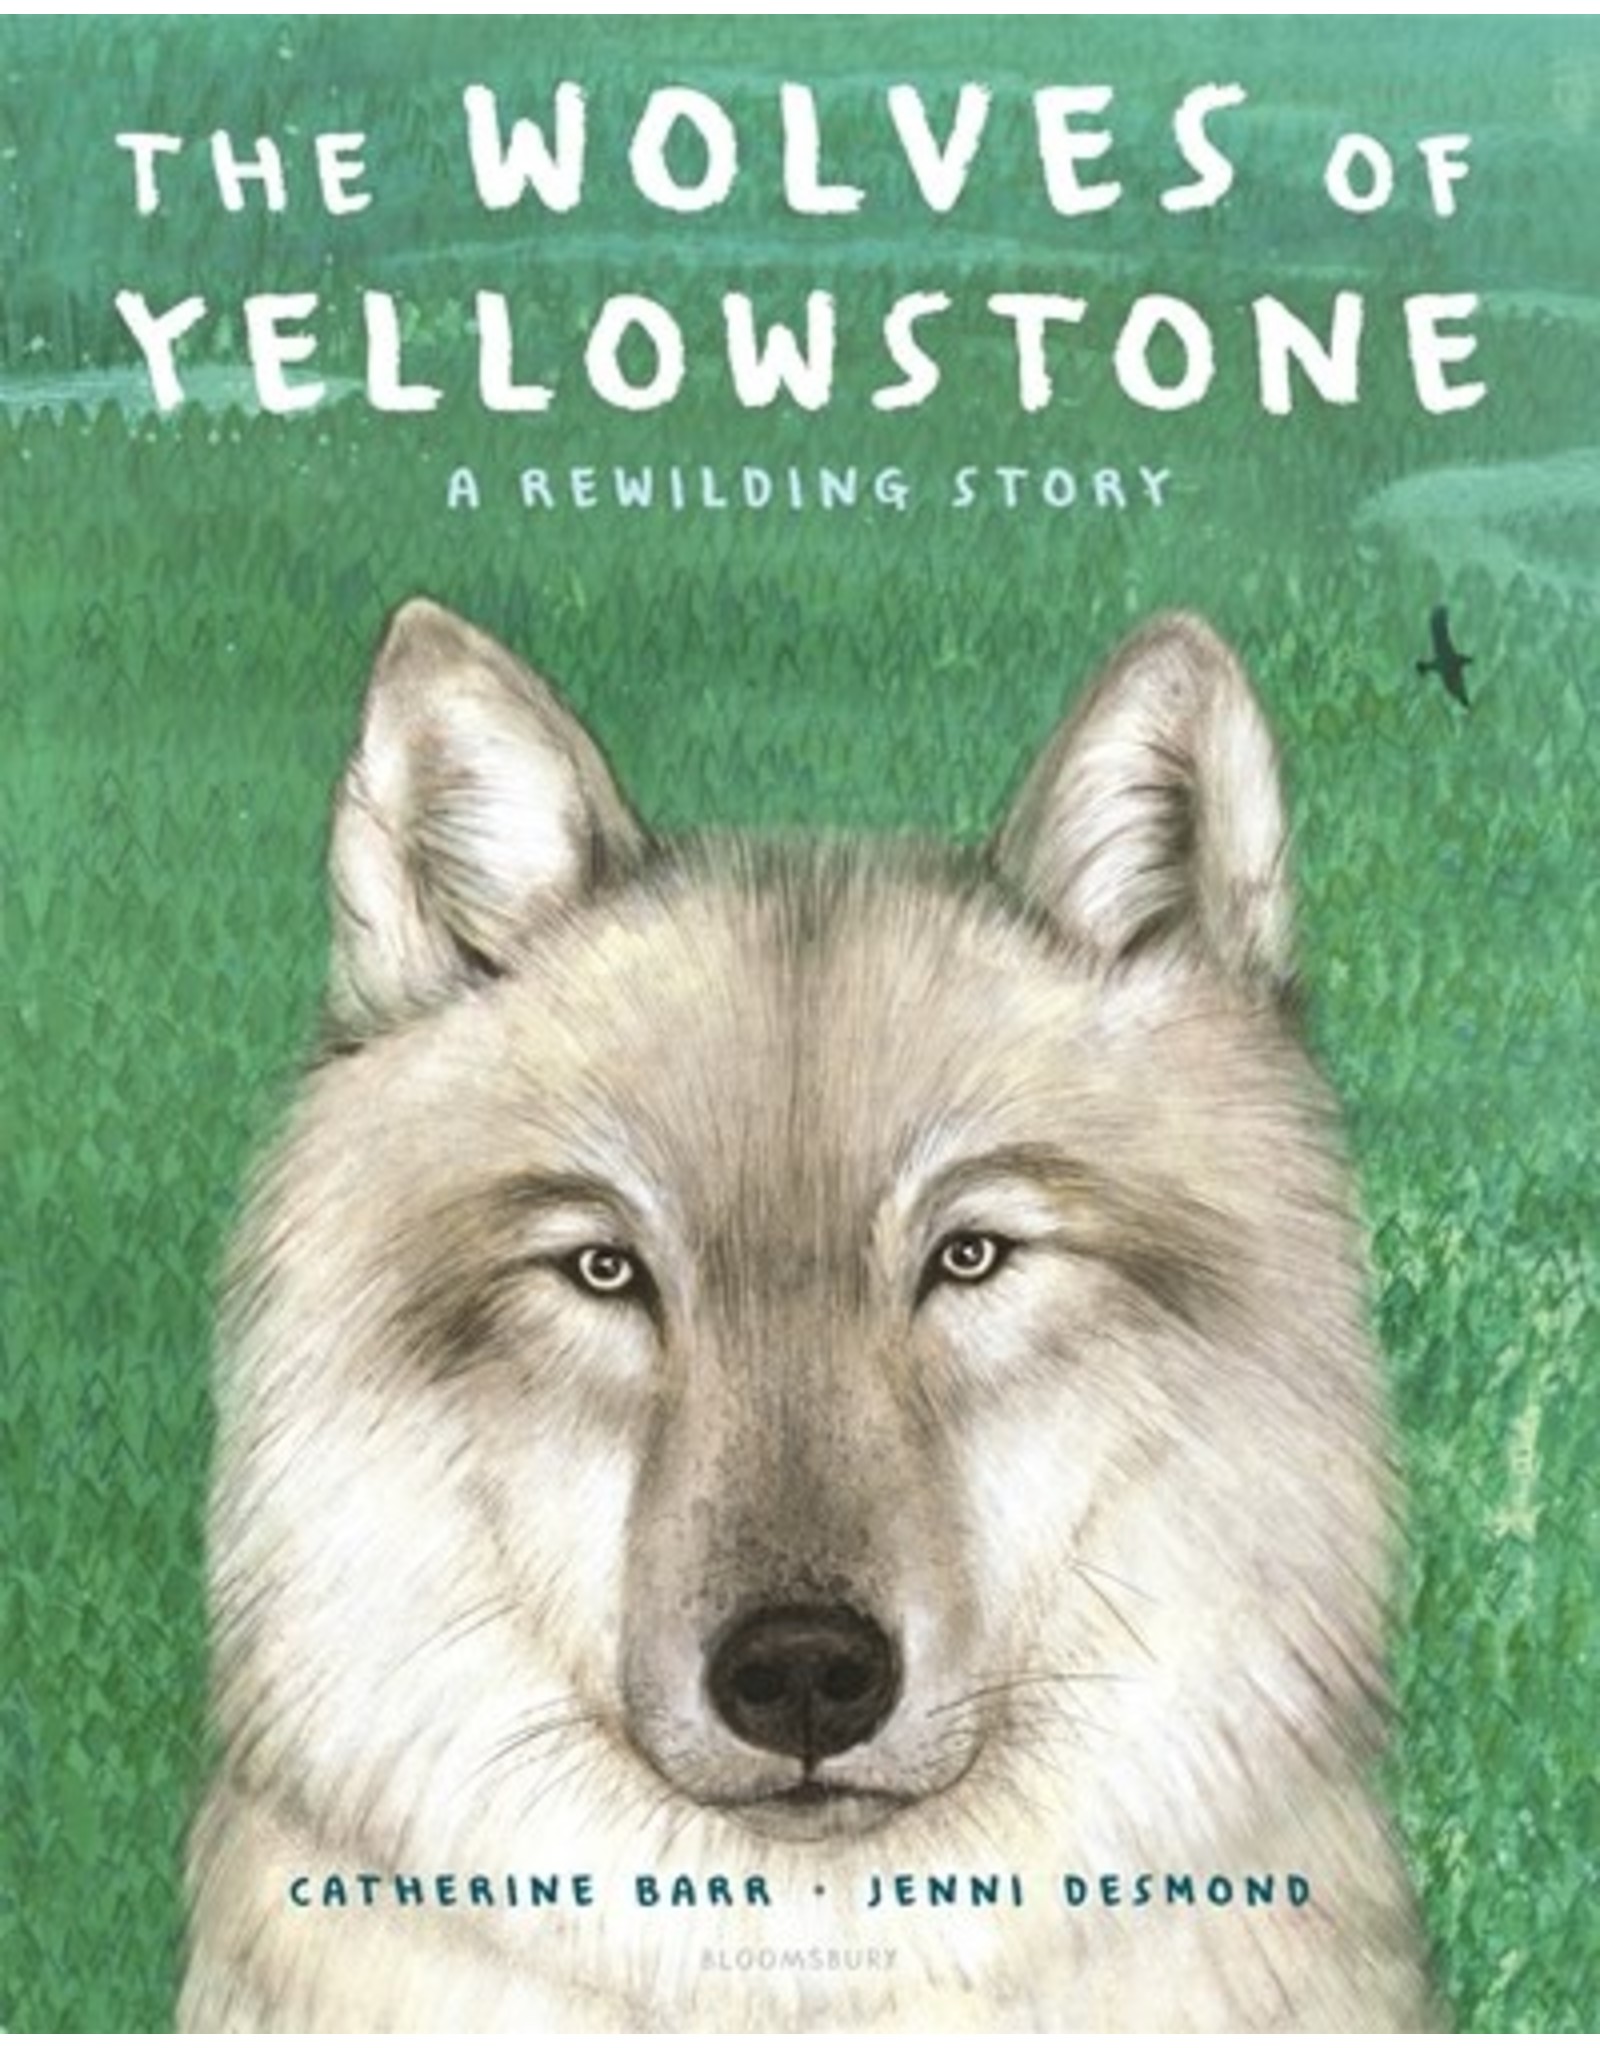 Books The Wolves of Yellowstone : A Rewilding Story by Catherine Barr  and Jenni Desmond